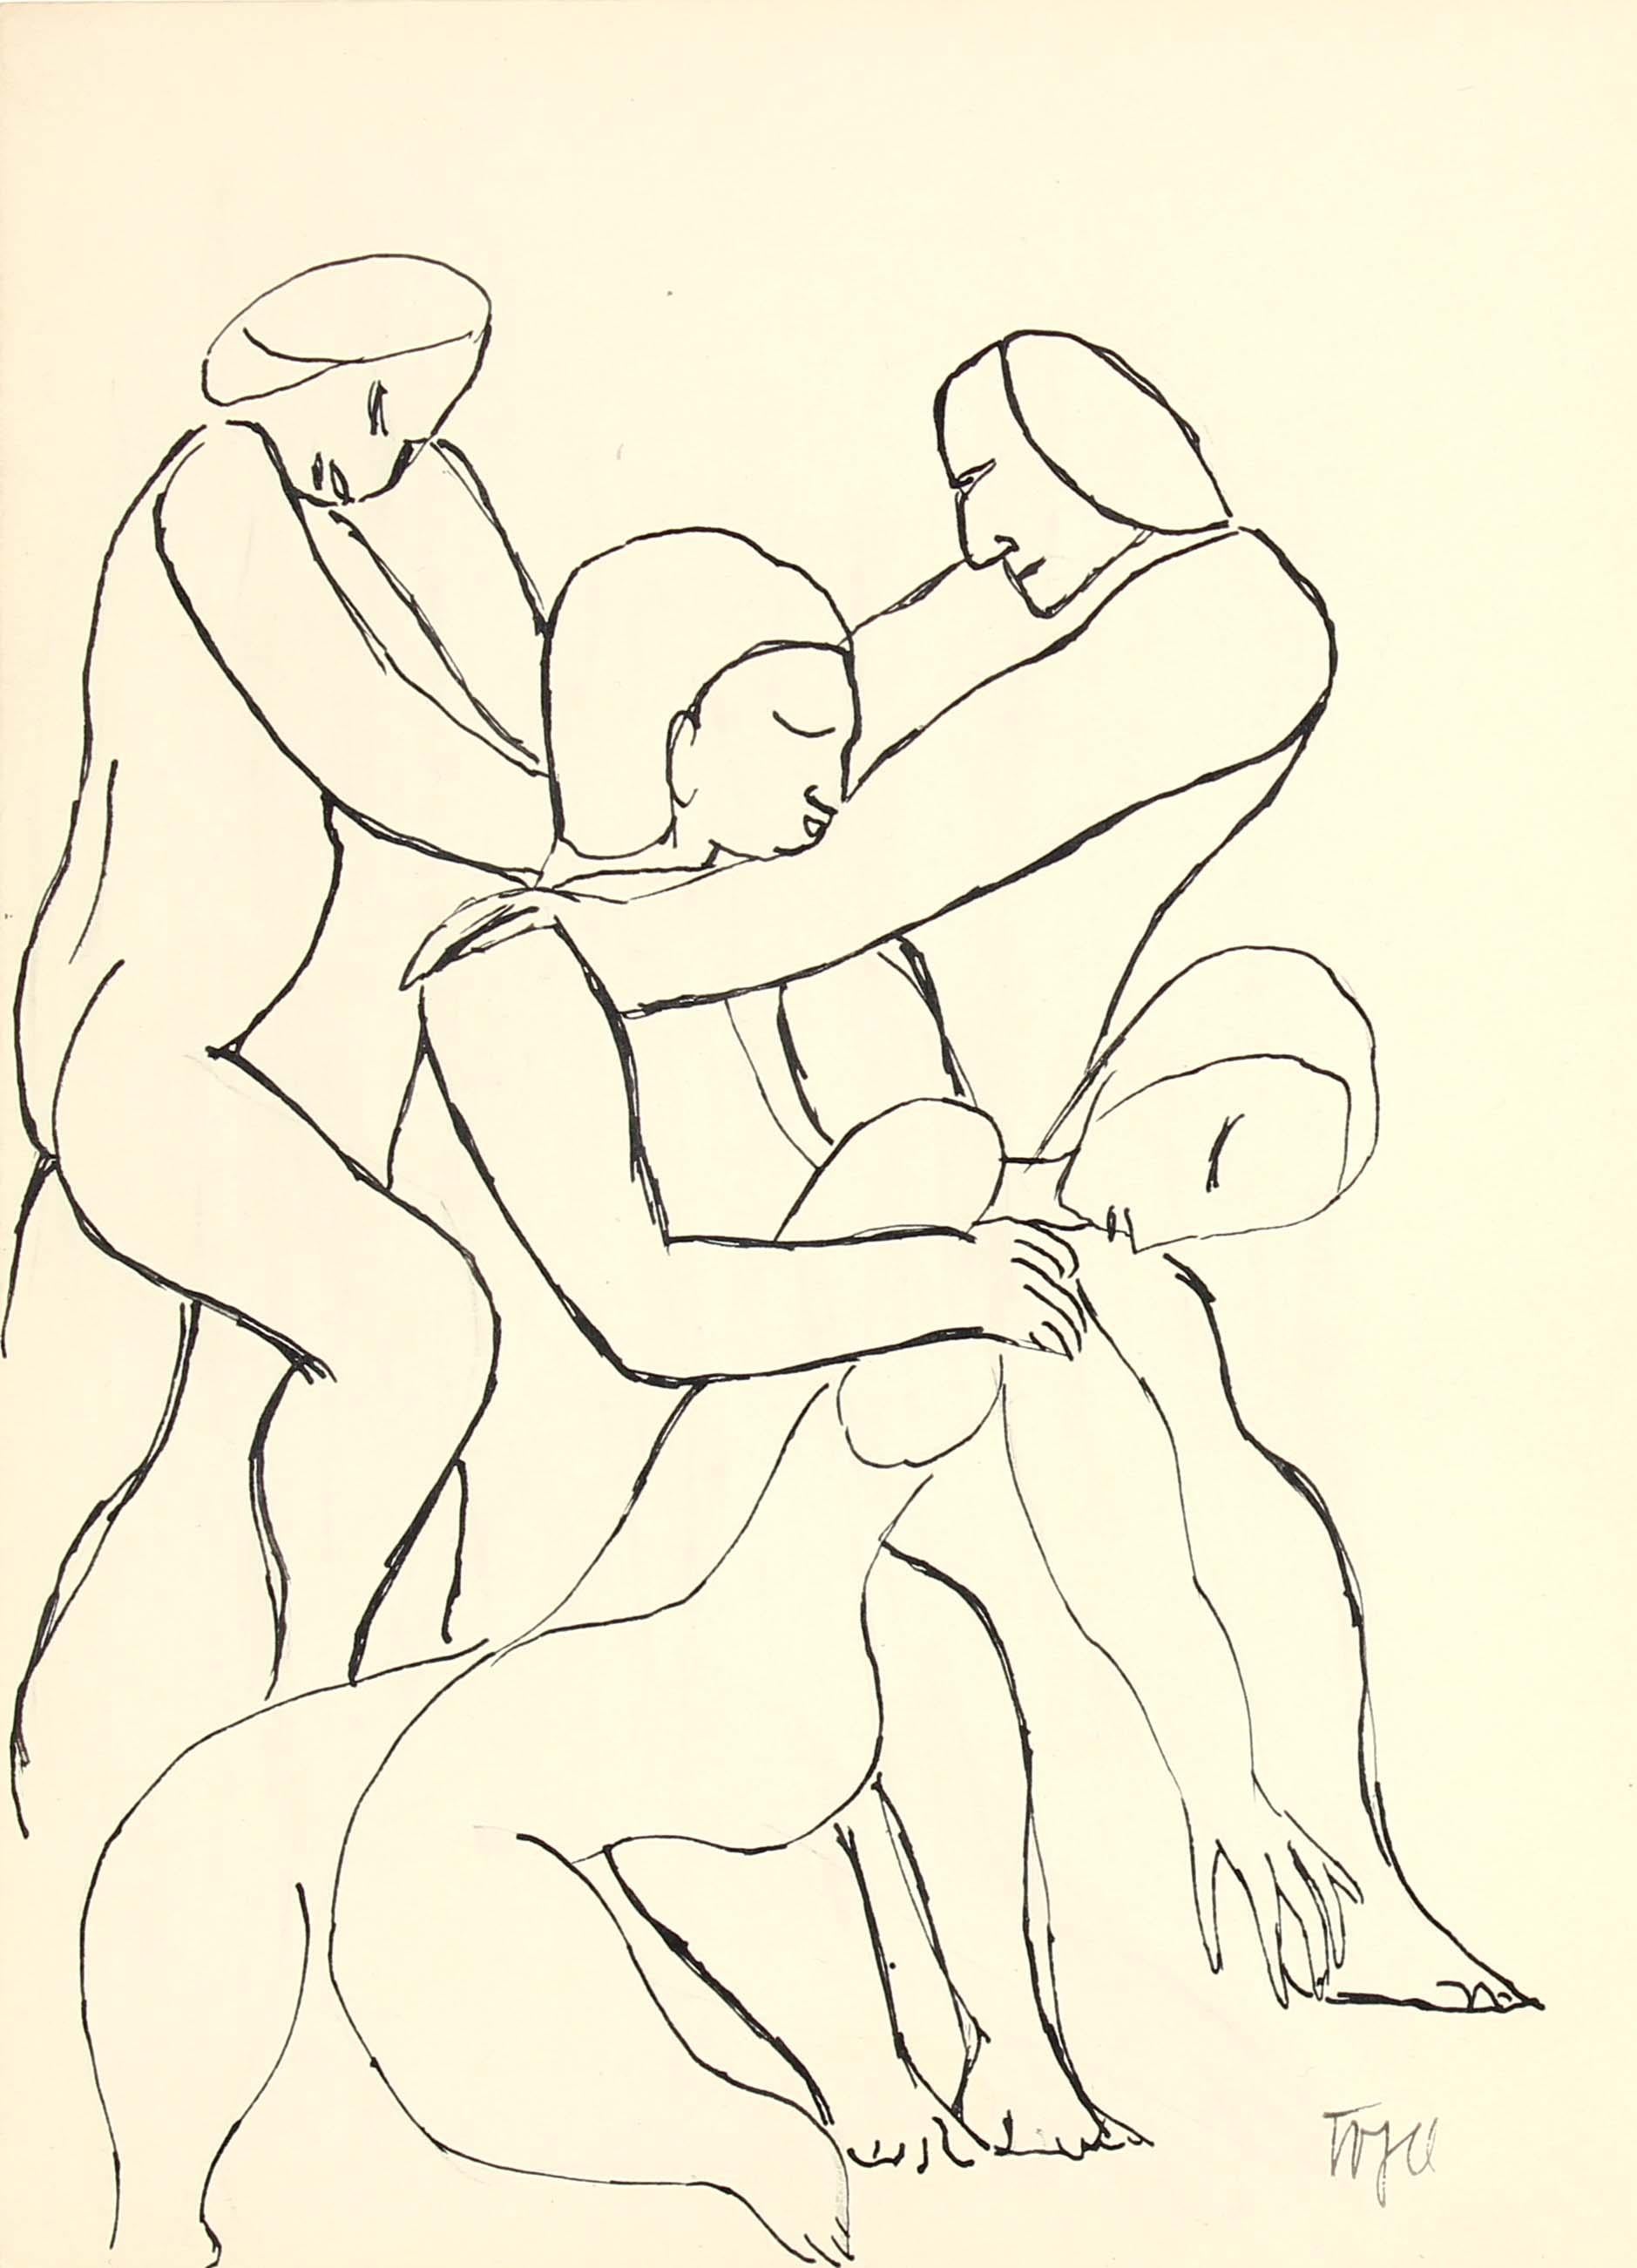 Jennings Tofel Figurative Art - 20th Century Expressionist Figurative Line Drawing in Ink